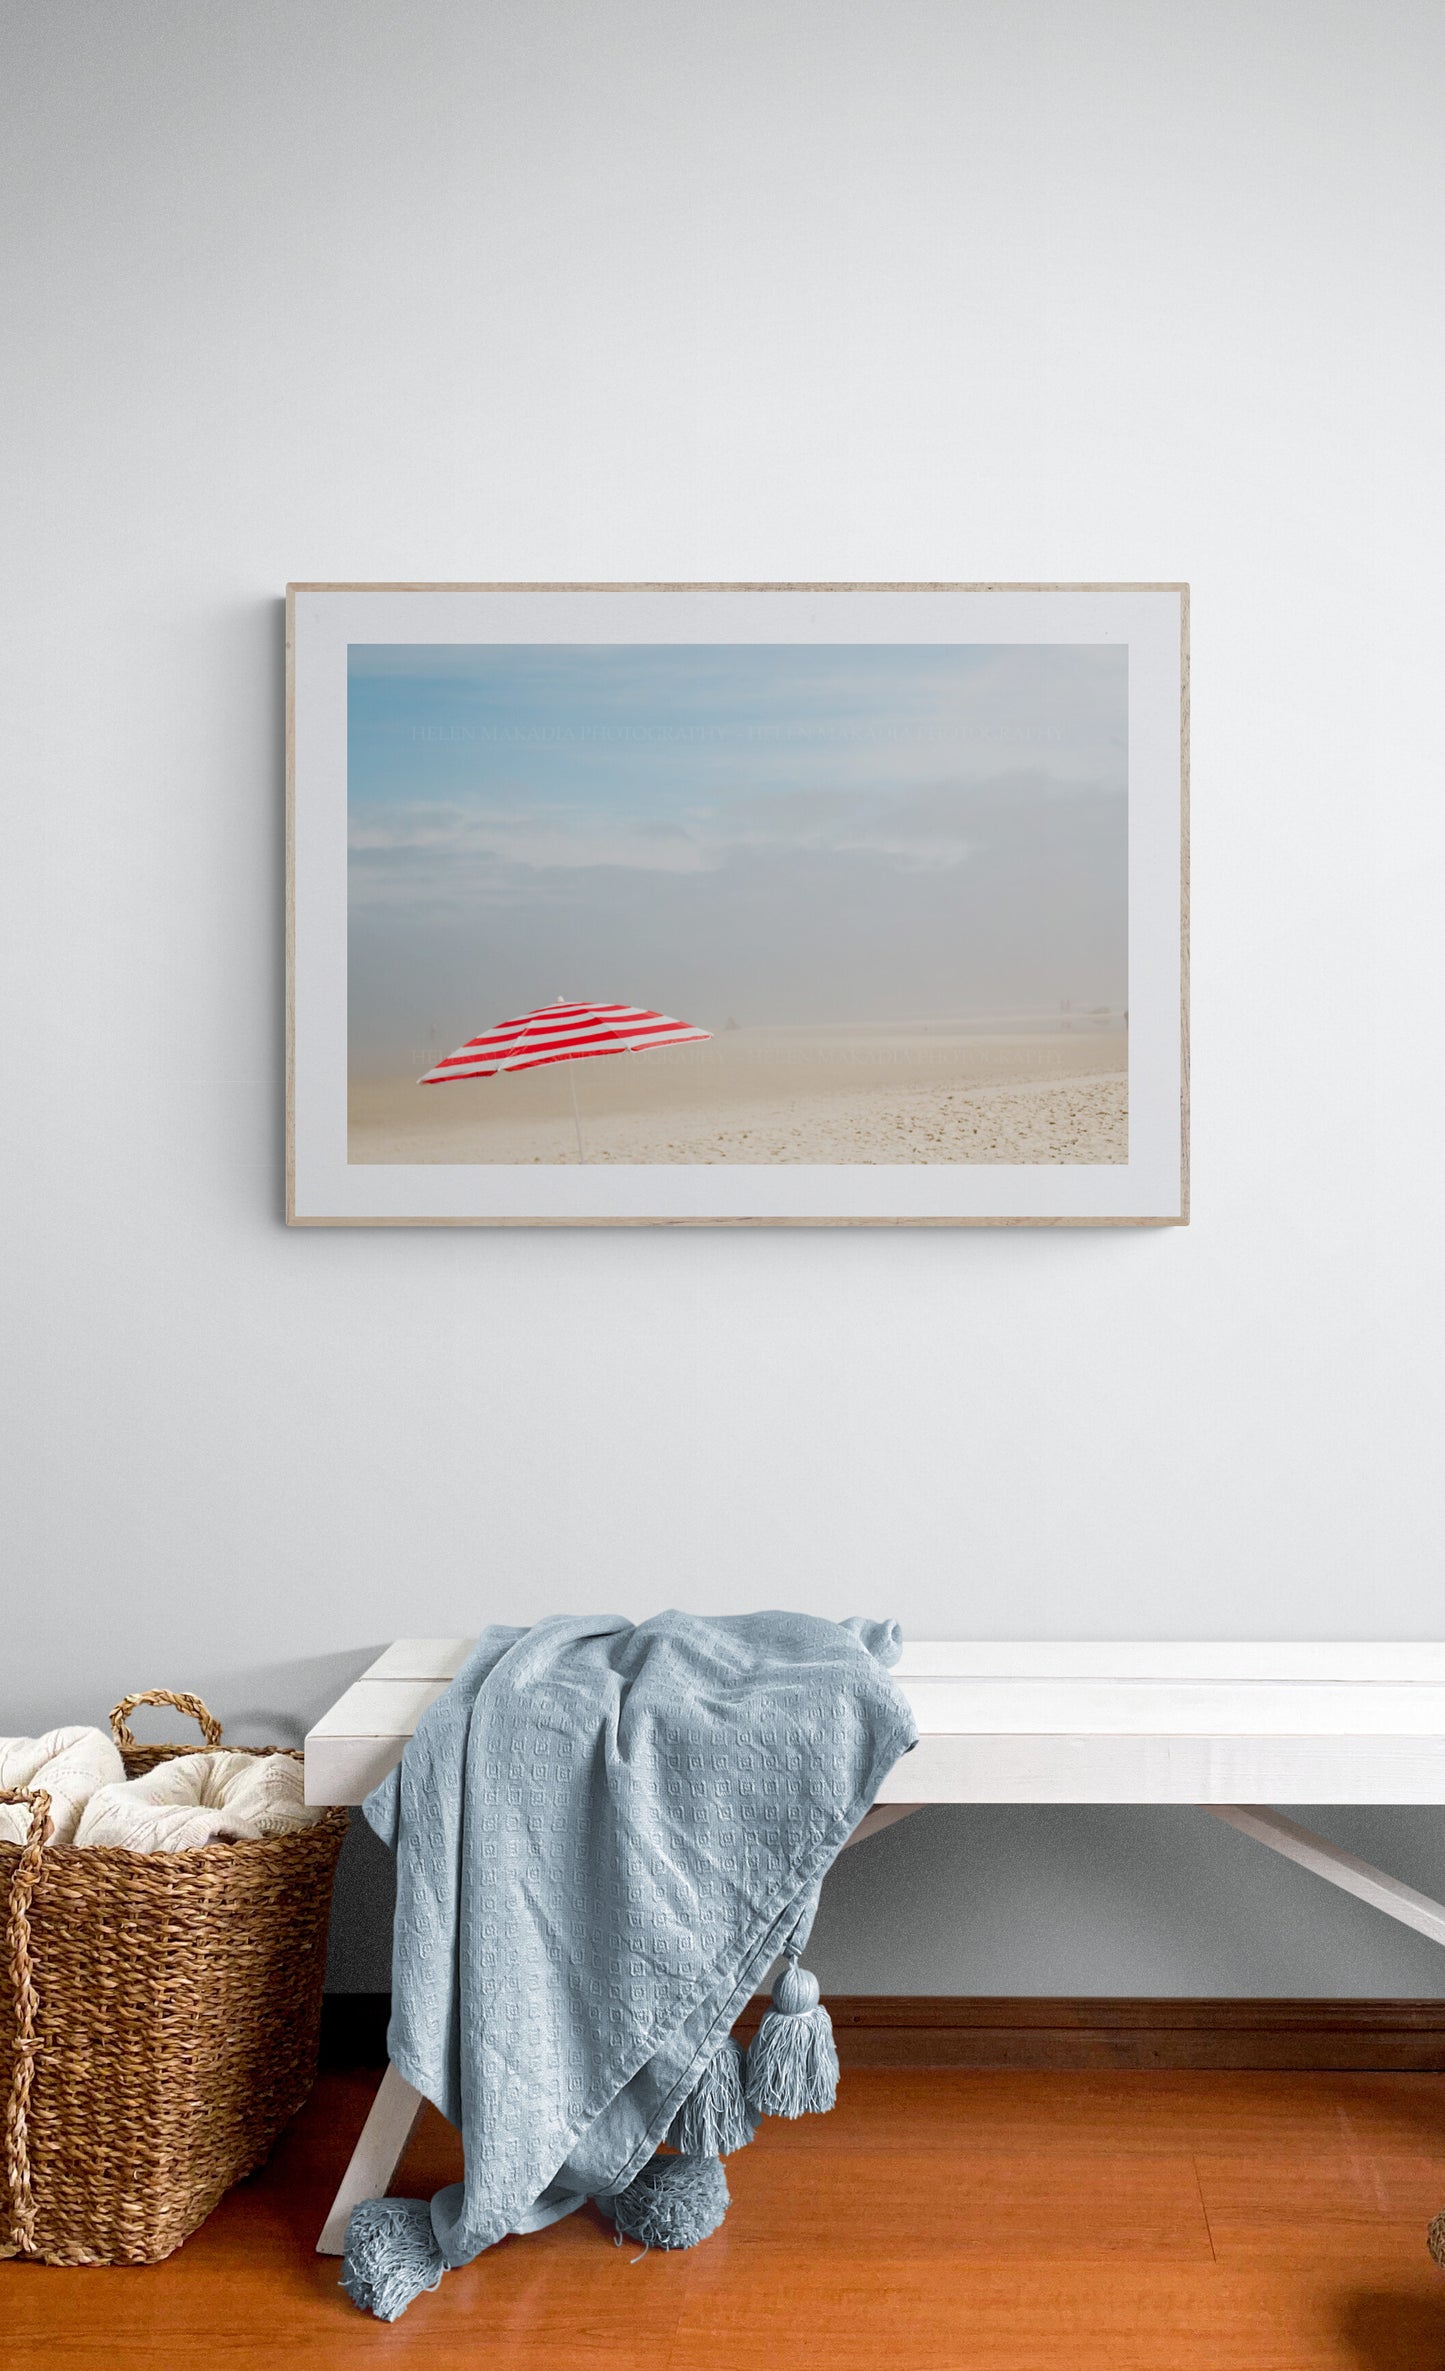 Red and white beach umbrella photograph as wall art in an entryway